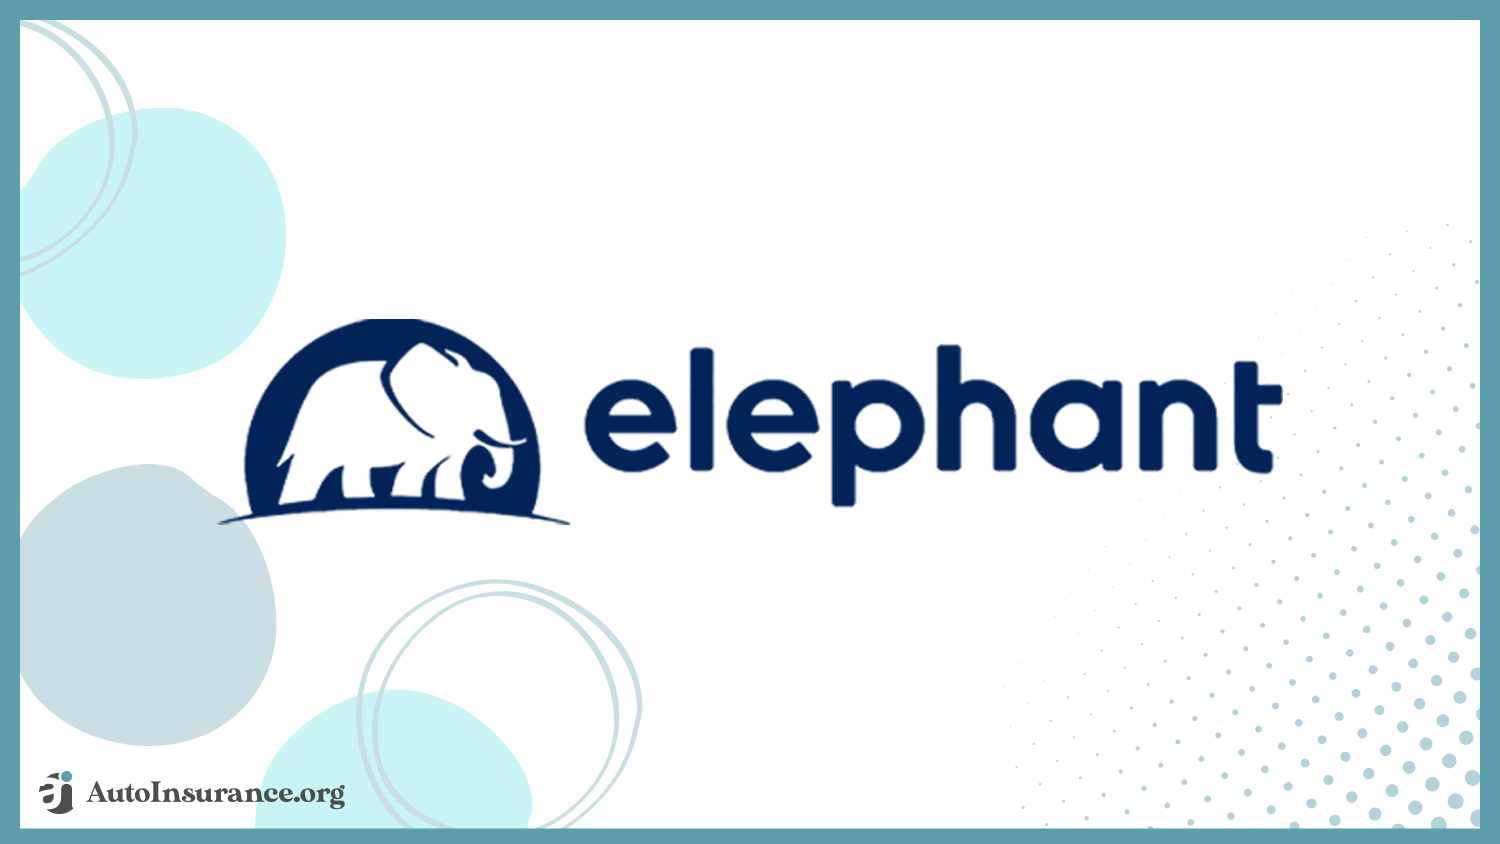 Elephant: cheap auto insurance for low-income families